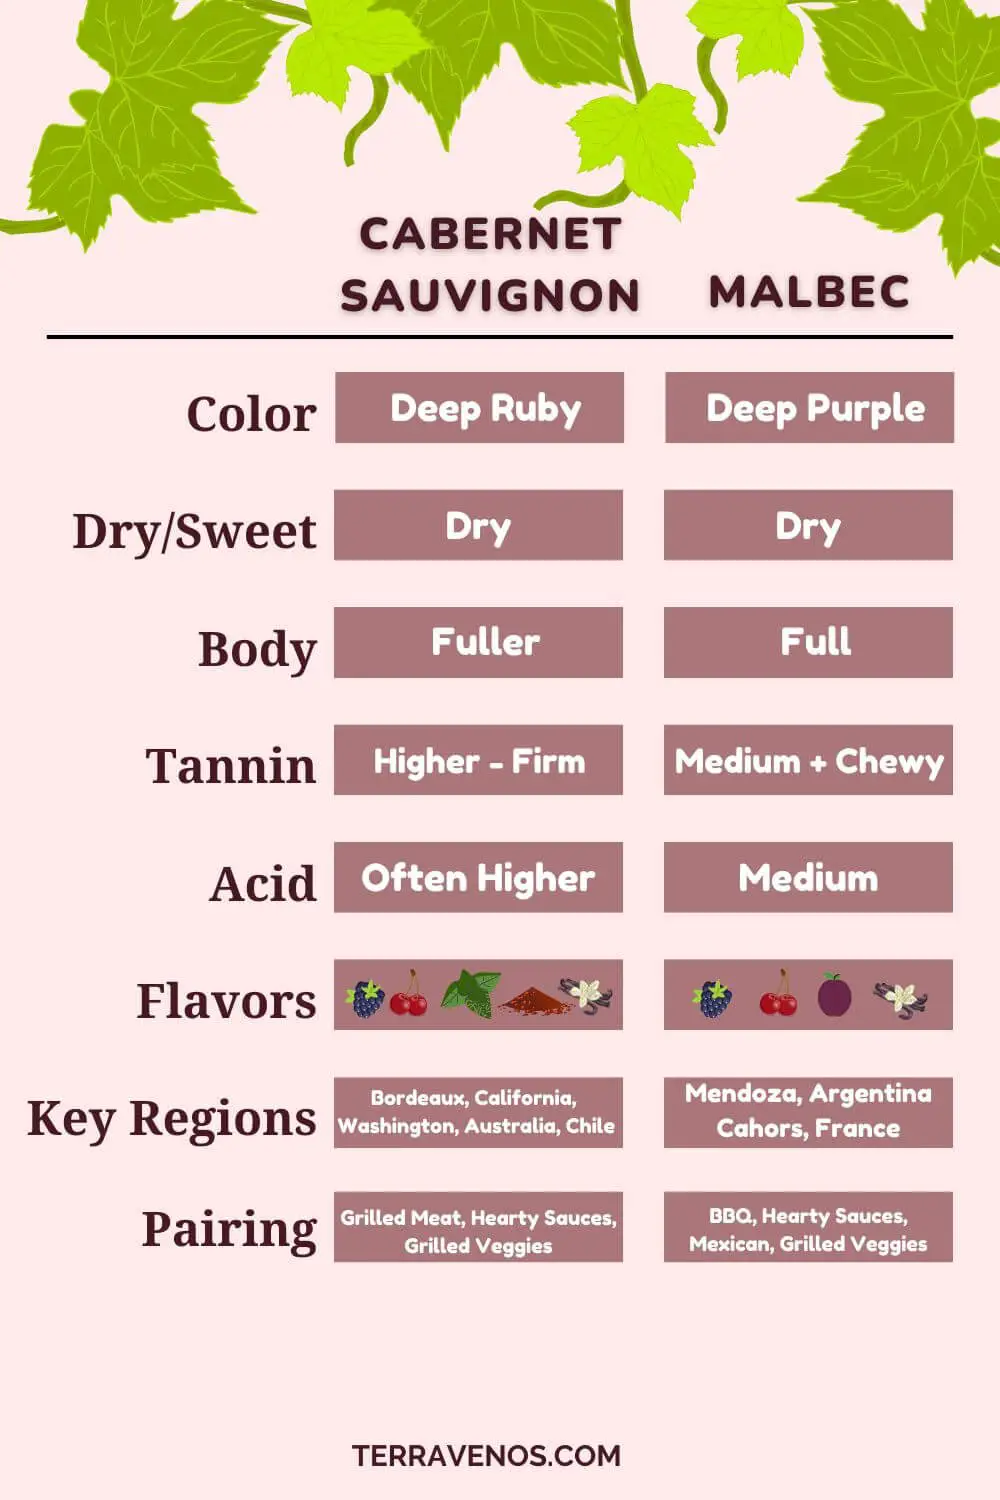 difference between cabernet sauvignon and malbec-infographic